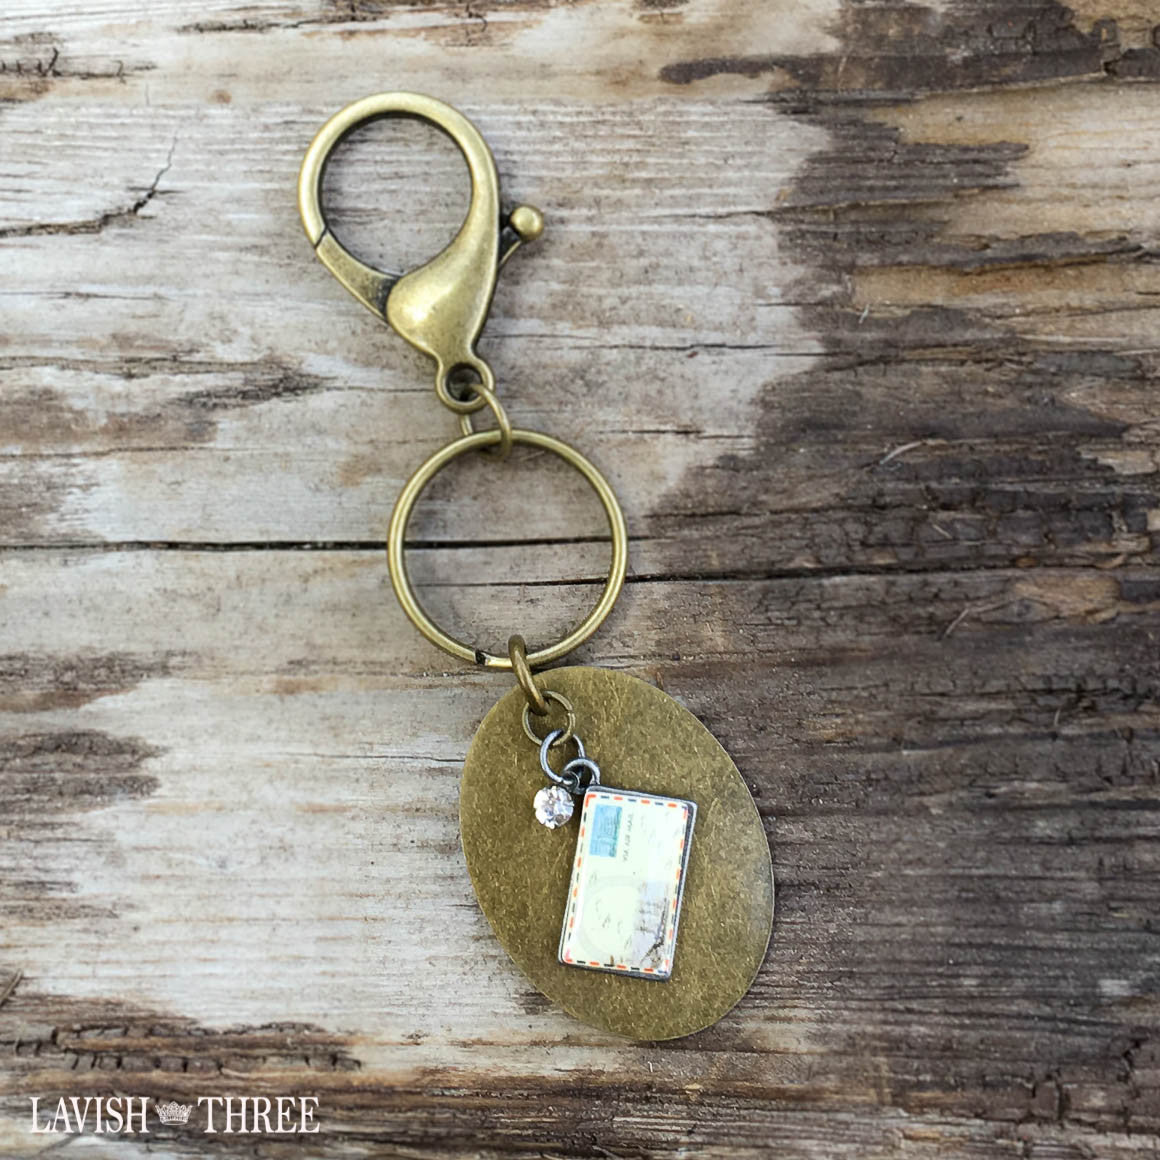 Welcome Home key-ring chain in antique brass finish with purse hook -  Lavish Three